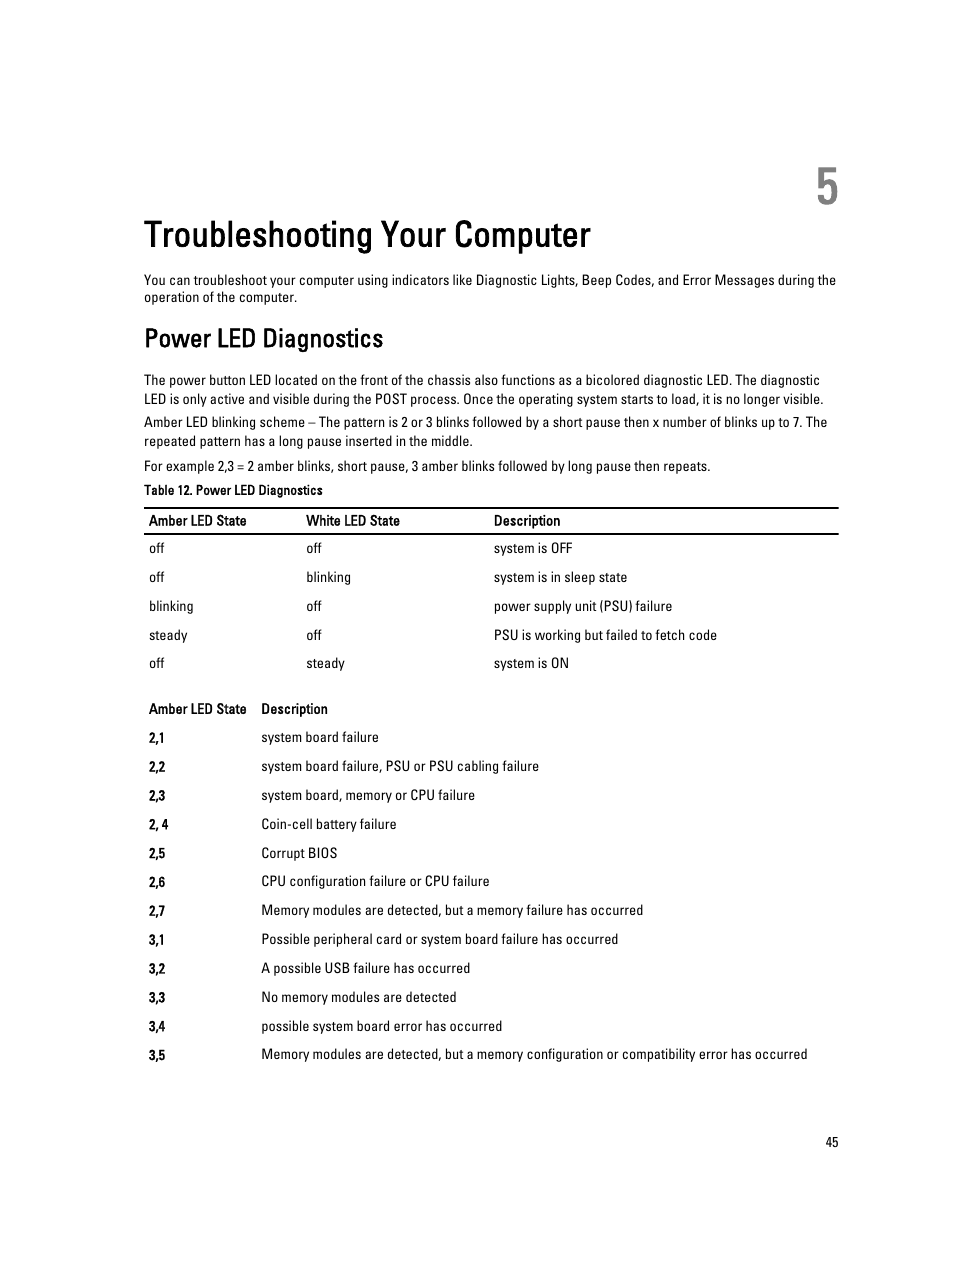 Troubleshooting your computer, Power led diagnostics, 5 troubleshooting  your computer | Dell Precision T1650 (Mid 2012) User Manual | Page 45 / 55